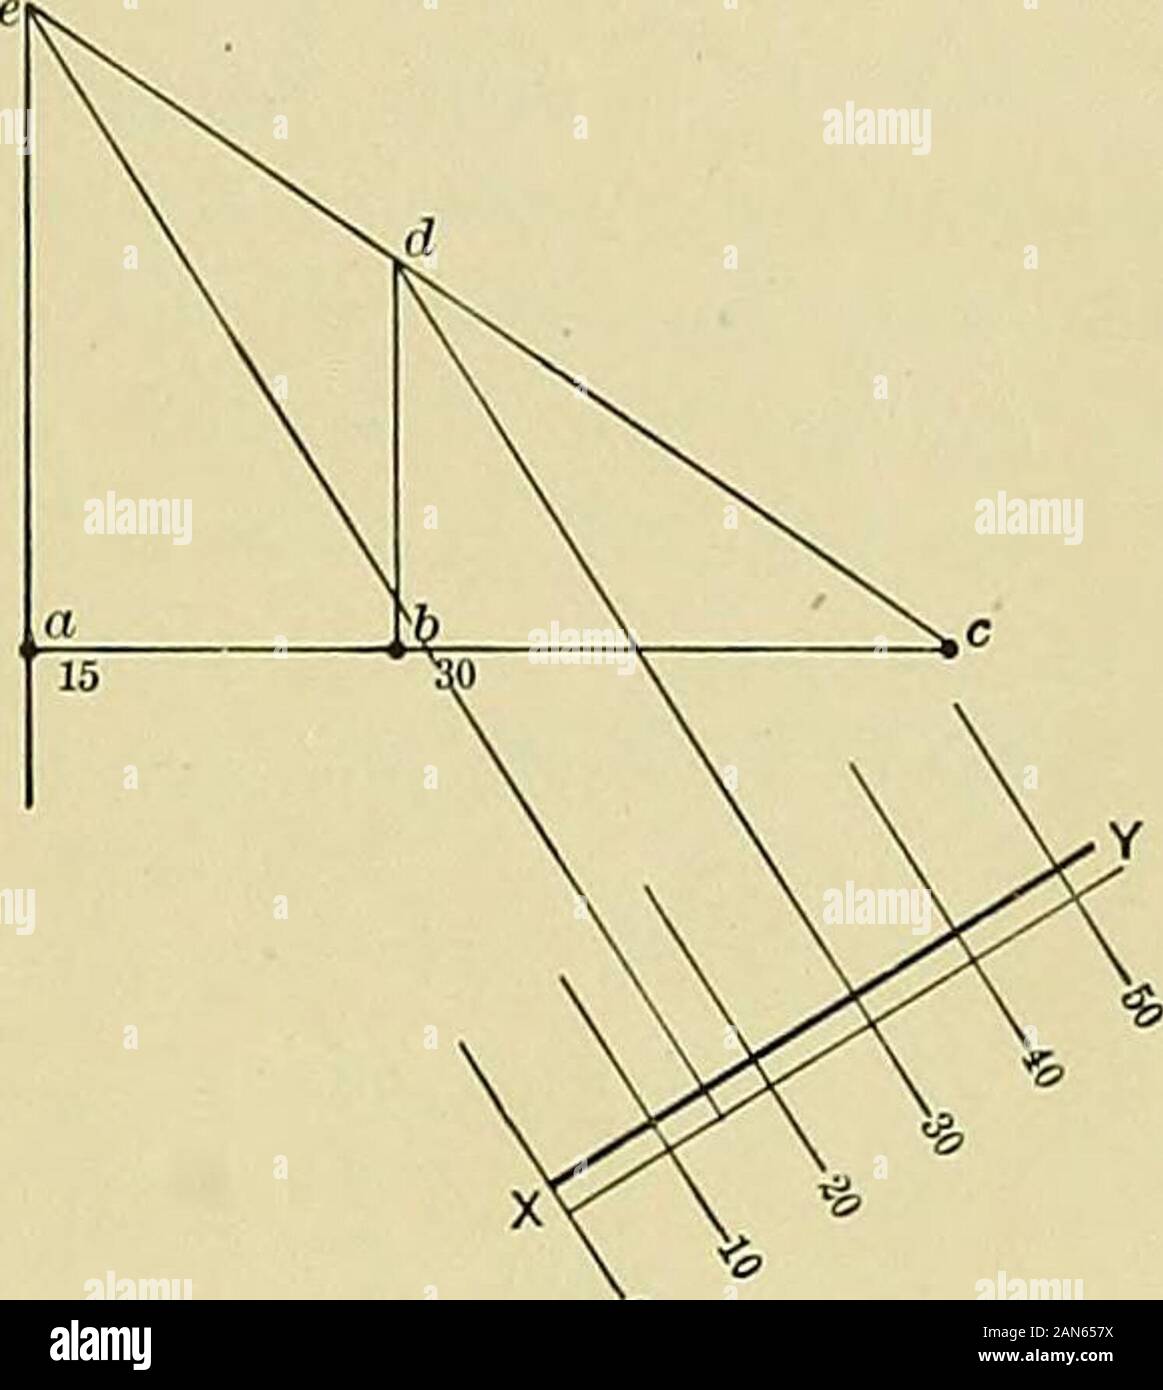 Practical Engineering Drawing And Third Angle Projection For